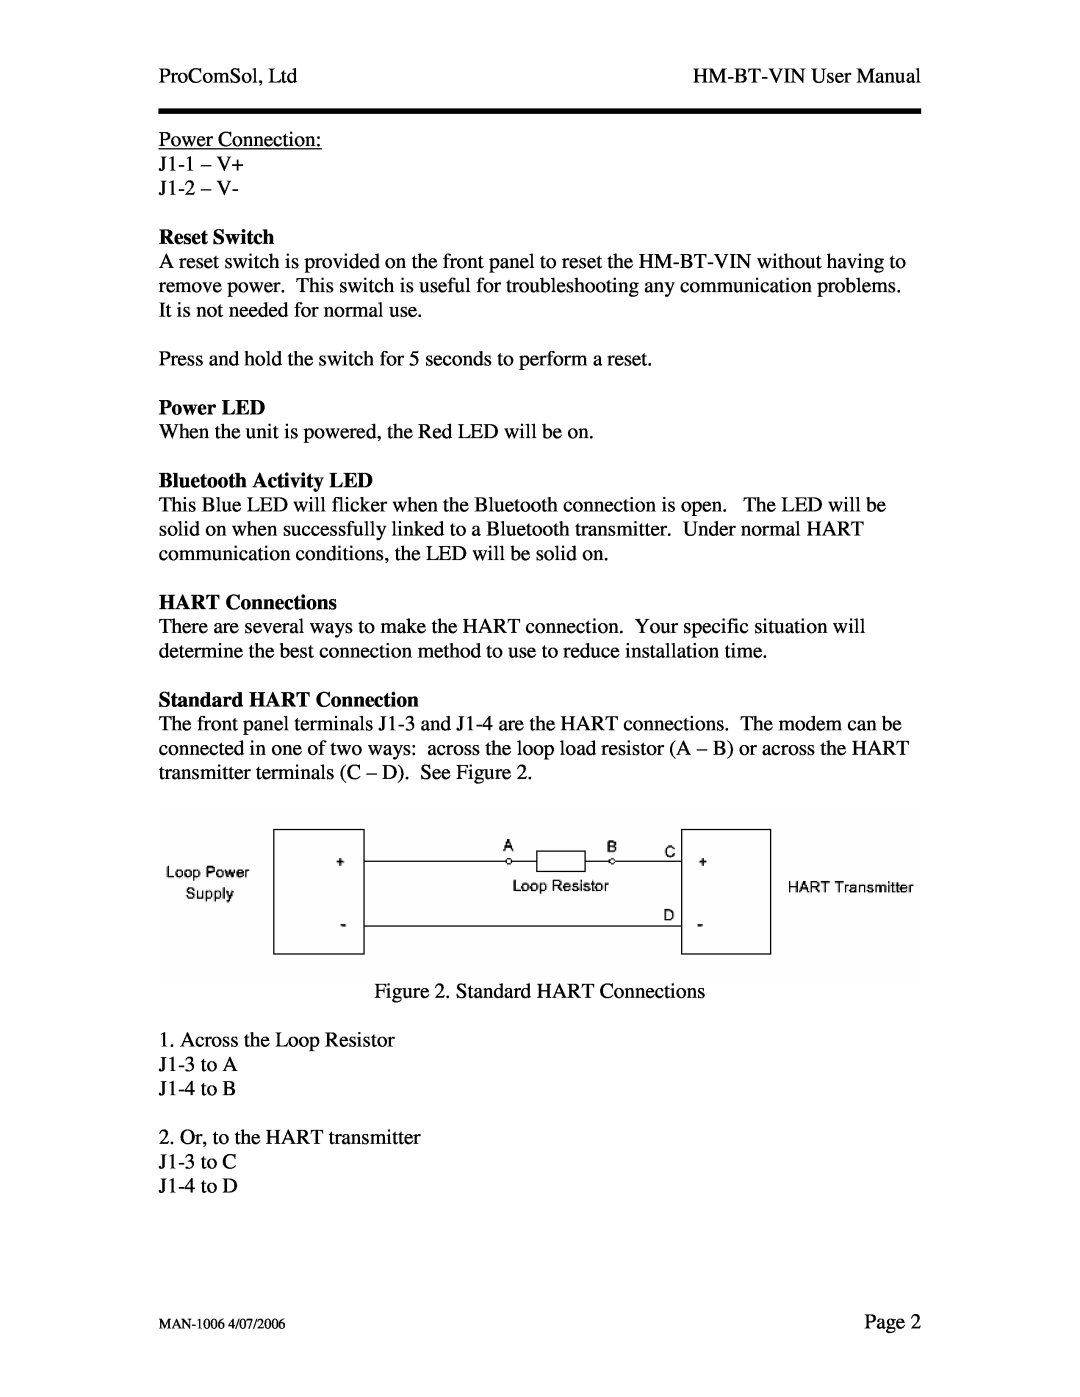 Linksys HM-BT-VIN user manual Reset Switch, Power LED, Bluetooth Activity LED, HART Connections, Standard HART Connection 